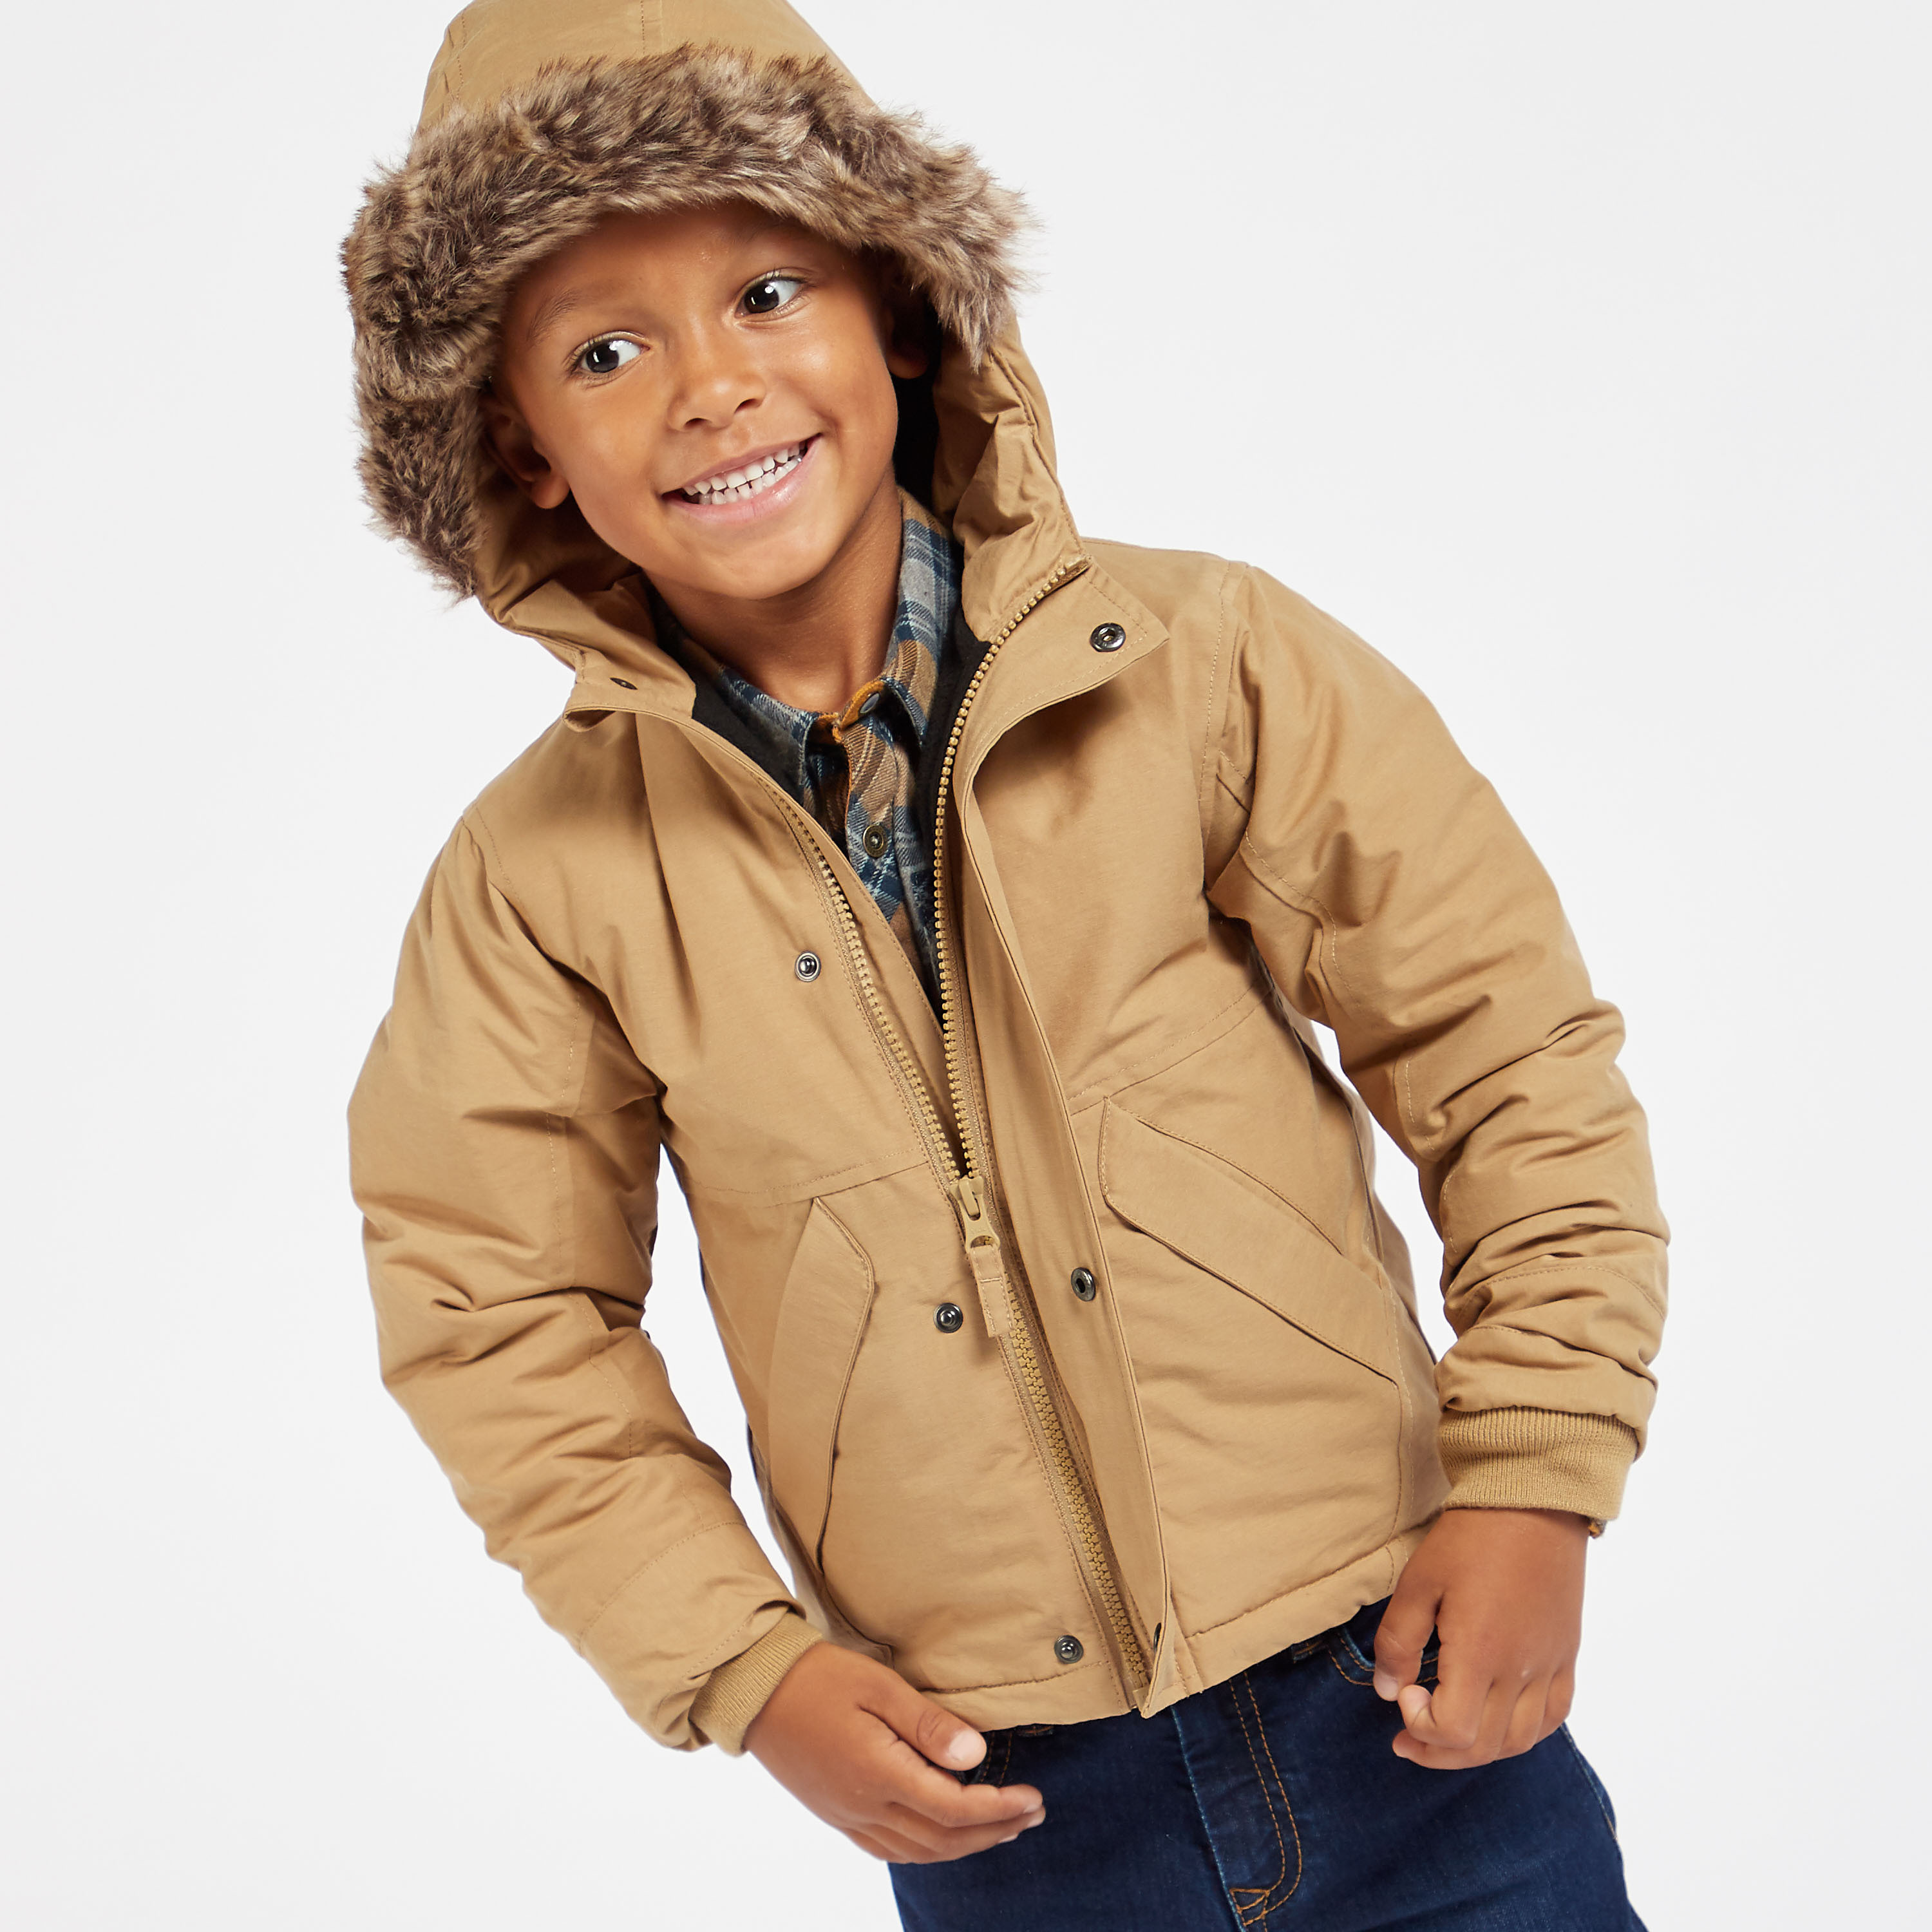 Finding the best boys jackets for your kids boys jackets boysu0027 puffer  jacket - c9 champion® fduqnhy | Boys puffer jacket, Jackets, Puffer jackets